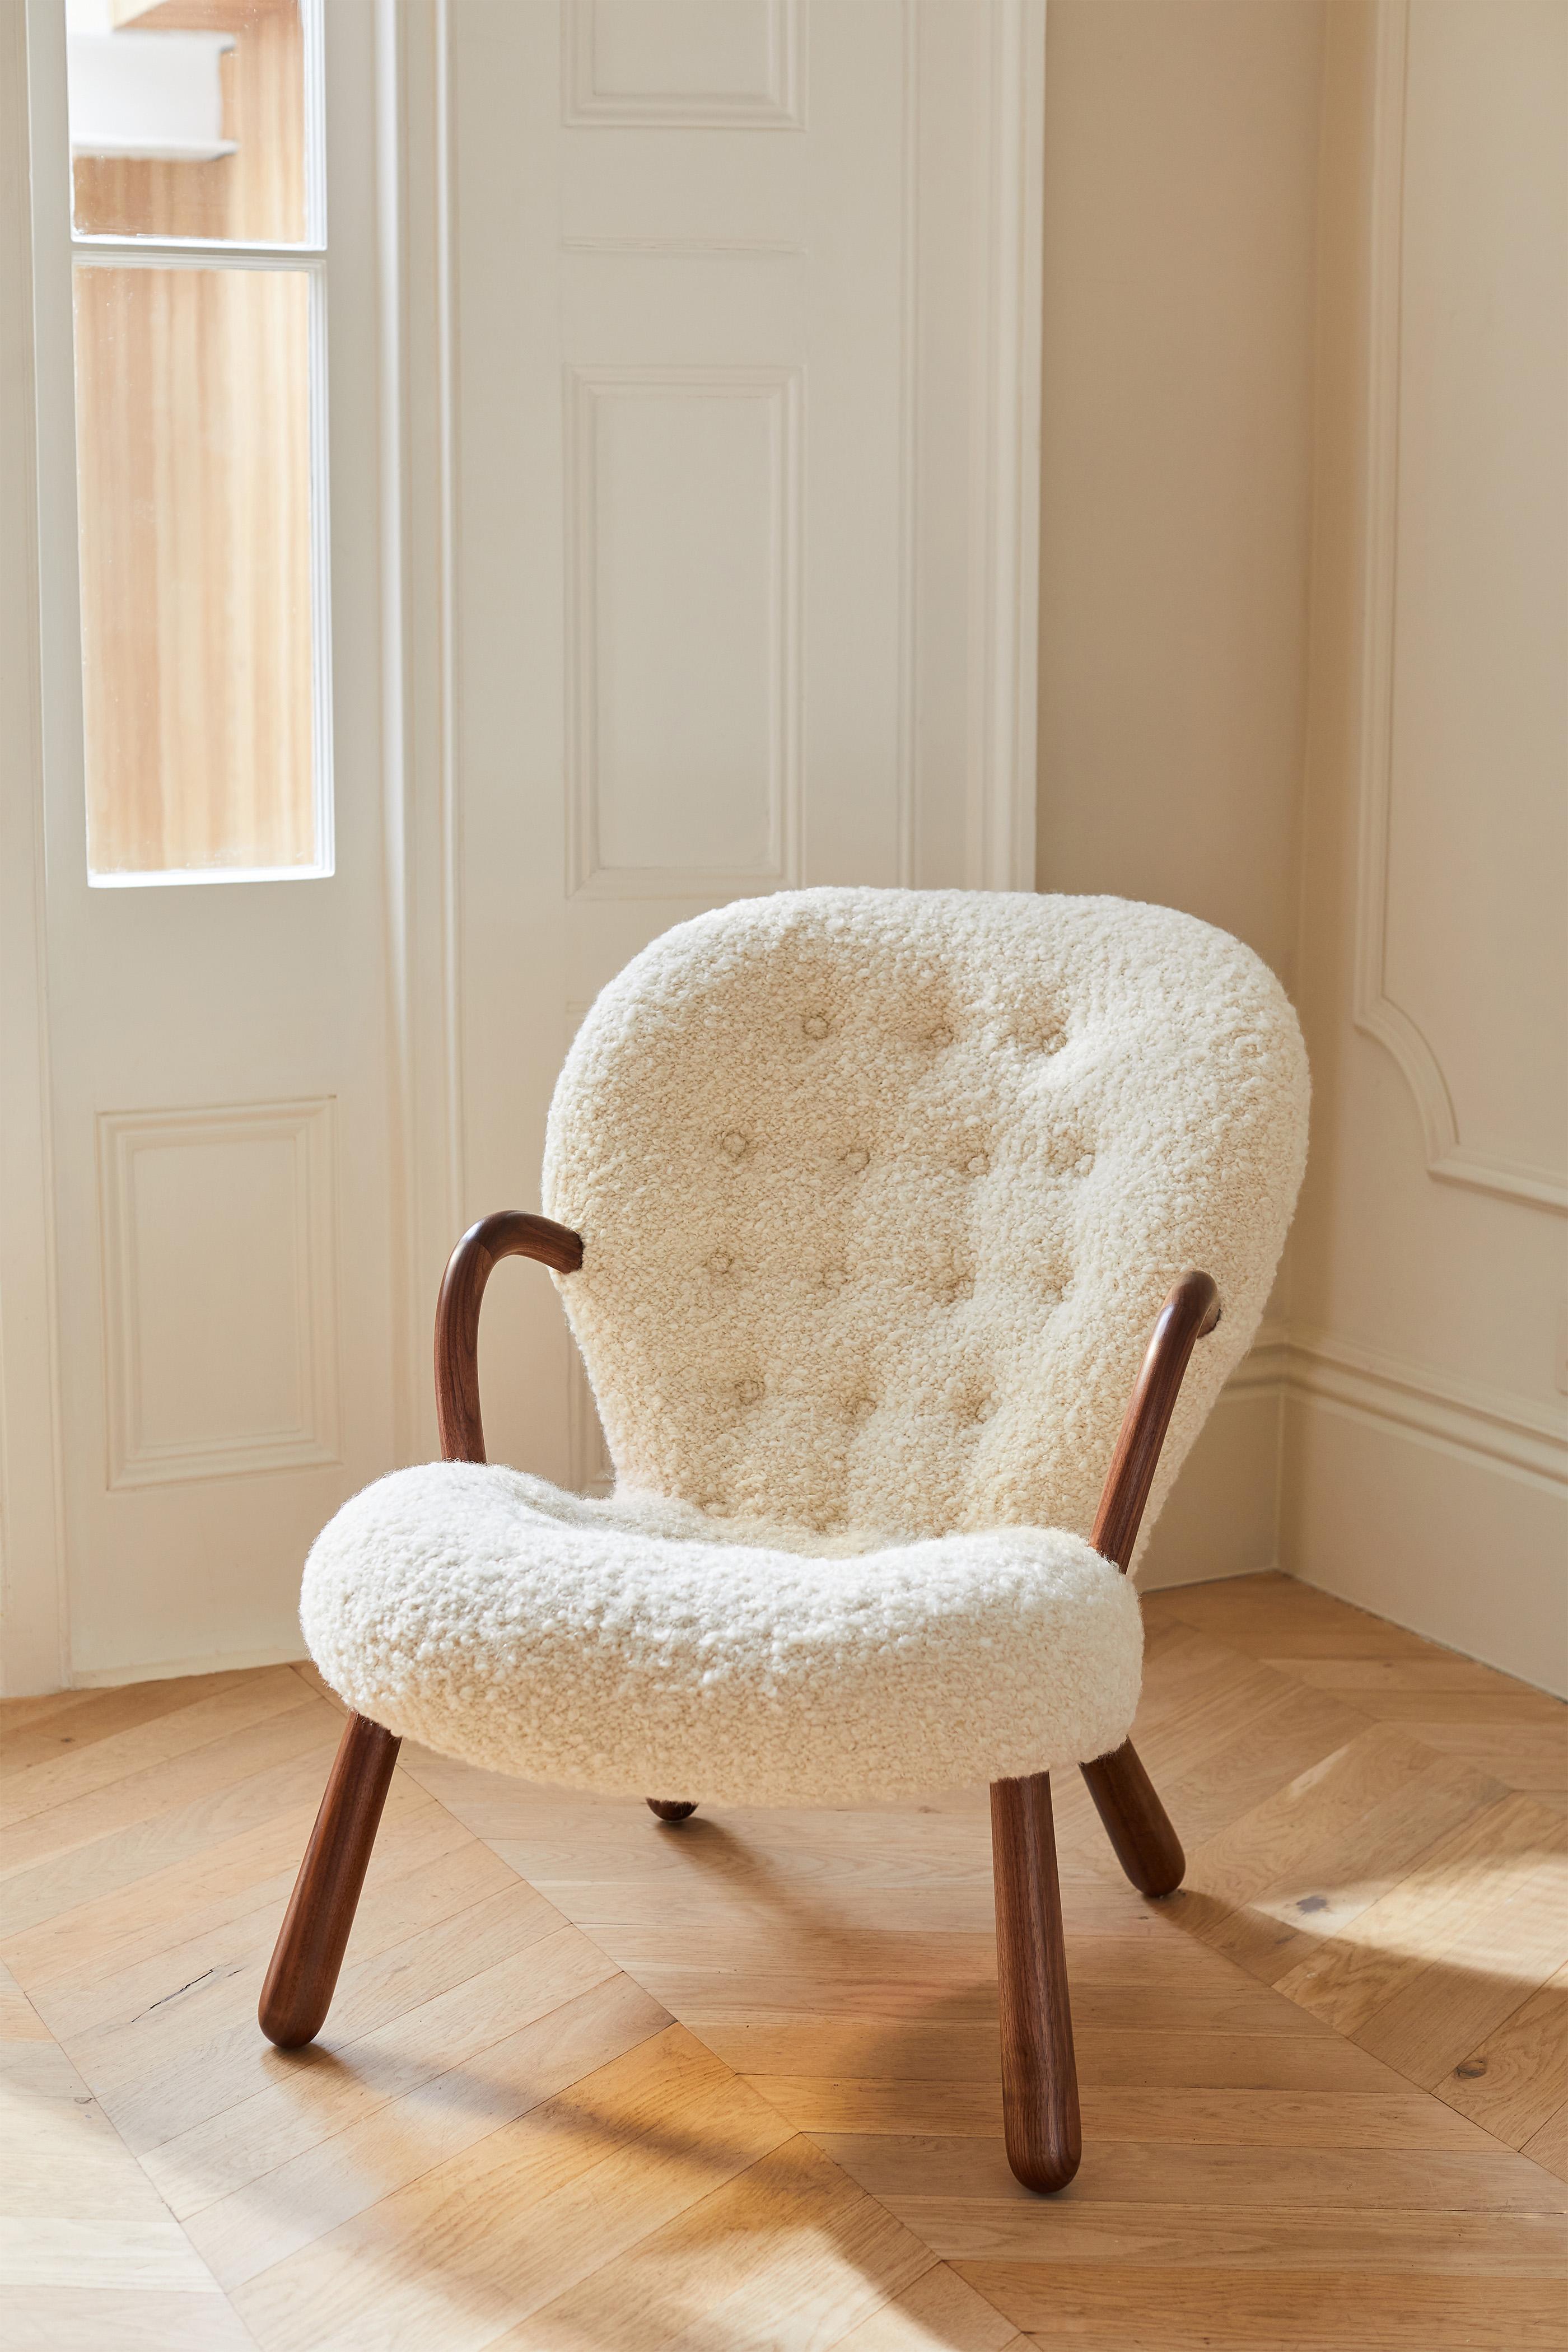 Official Re-Edition of the iconic Clam chair by Arnold Madsen.

Dagmar in collaboration with the estate of Arnold Madsen is proud to re-launch the Clam Chair - one of the most cherished and sought after Scandinavian furniture designs of the 20th